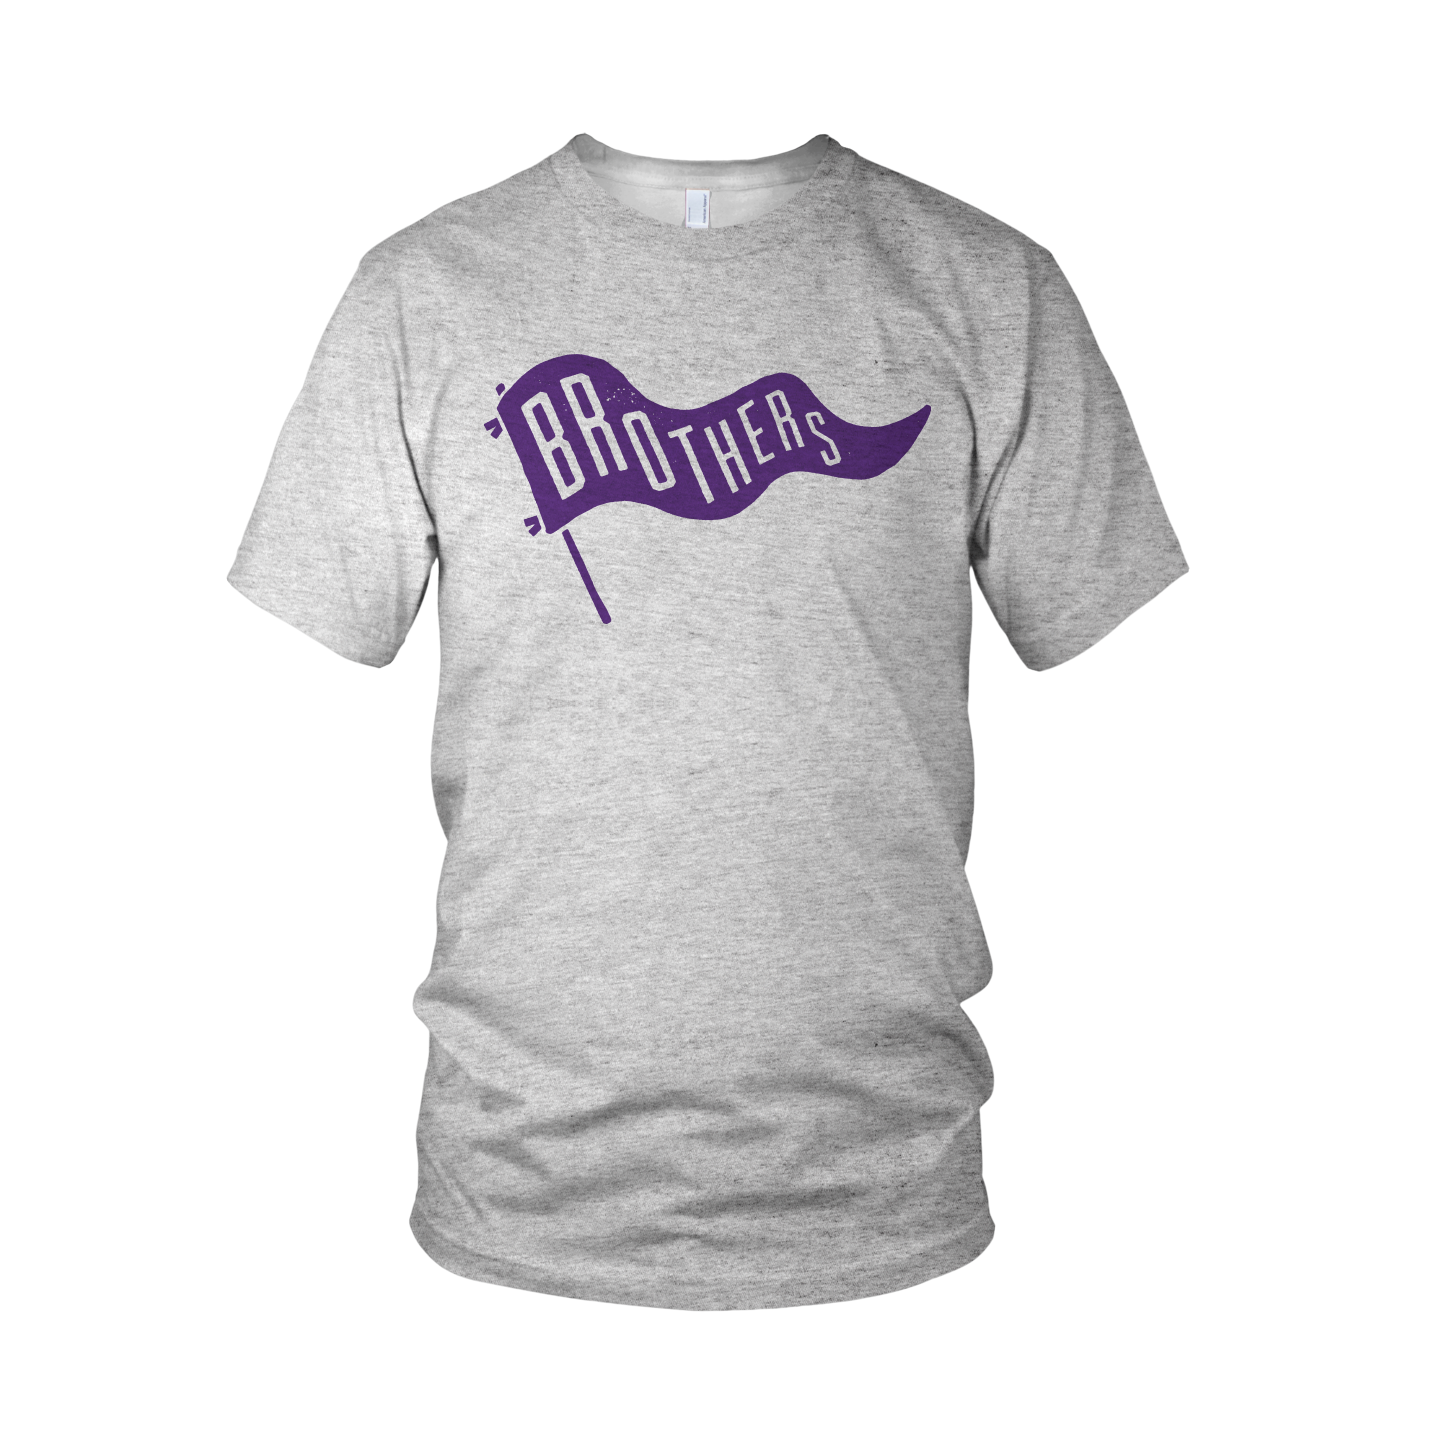 CBHS-PopUp-Shirts2.png